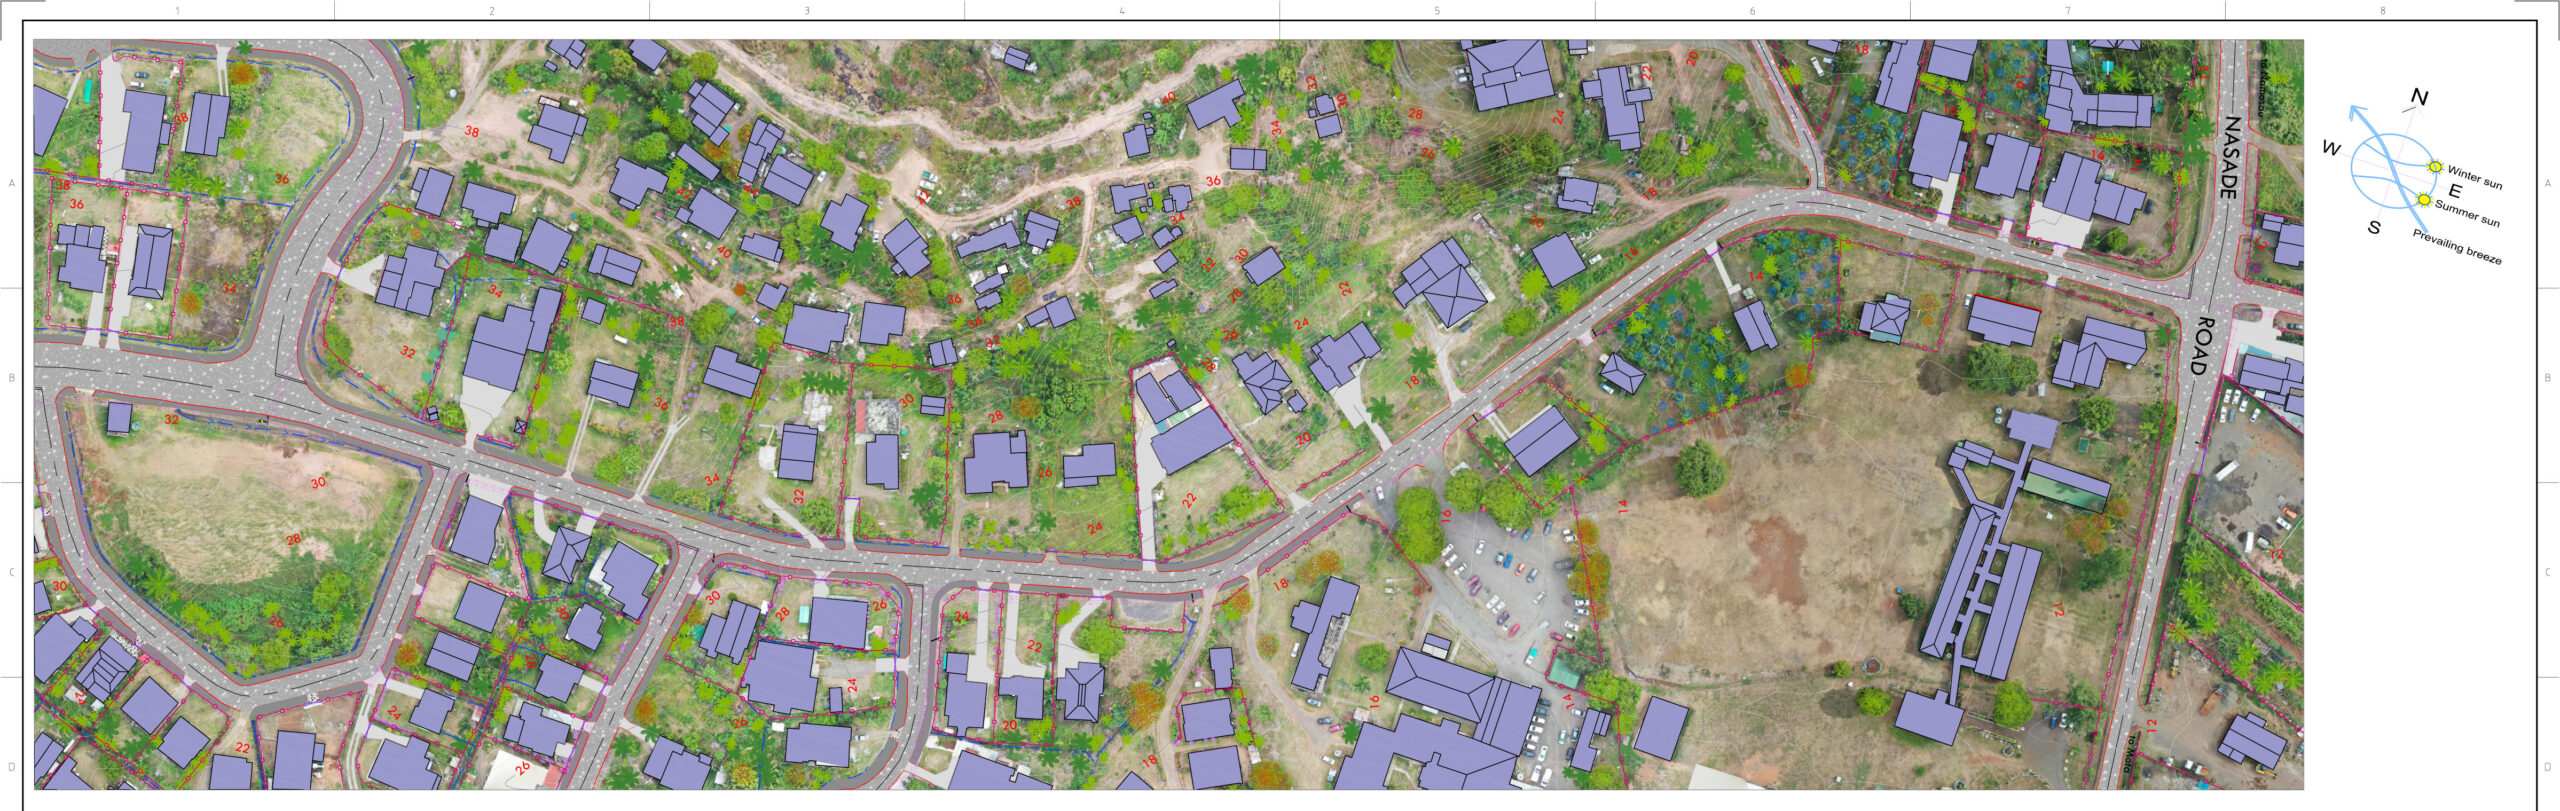 KP Image Overlay Aerial Topographic Survey